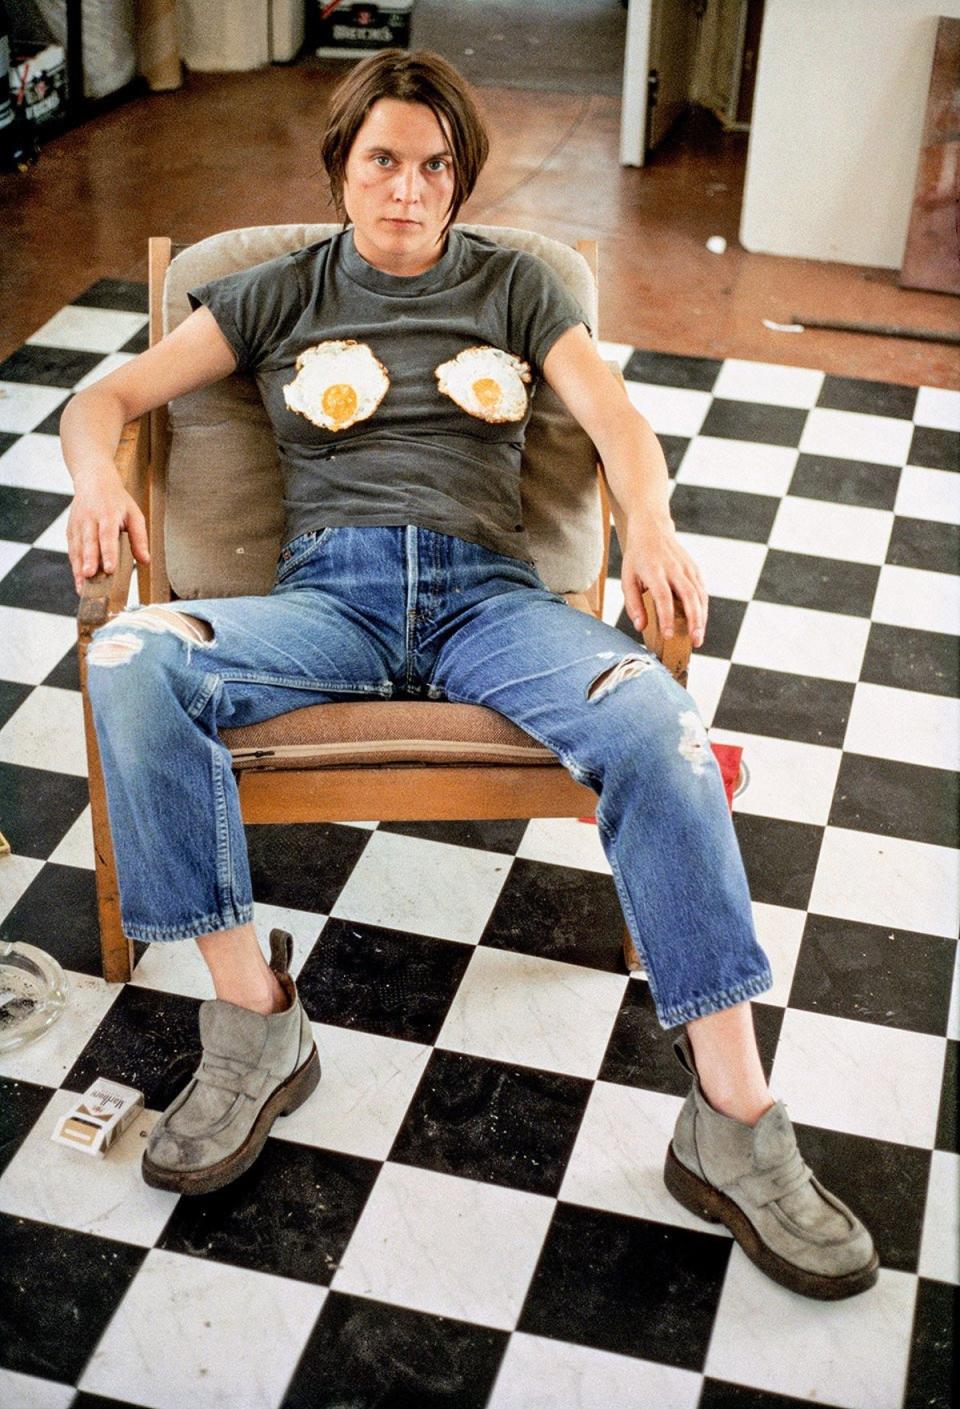 Sarah Lucas, ‘Self Portrait with Fried Eggs’, 1996. The egg is a common motif in feminist art, often as a visual eponym for the female body itself, and to explore everything from sexism and eroticism to themes of oppression and liberation. (Courtesy of Sarah Lucas and Sadie Coles HQ)